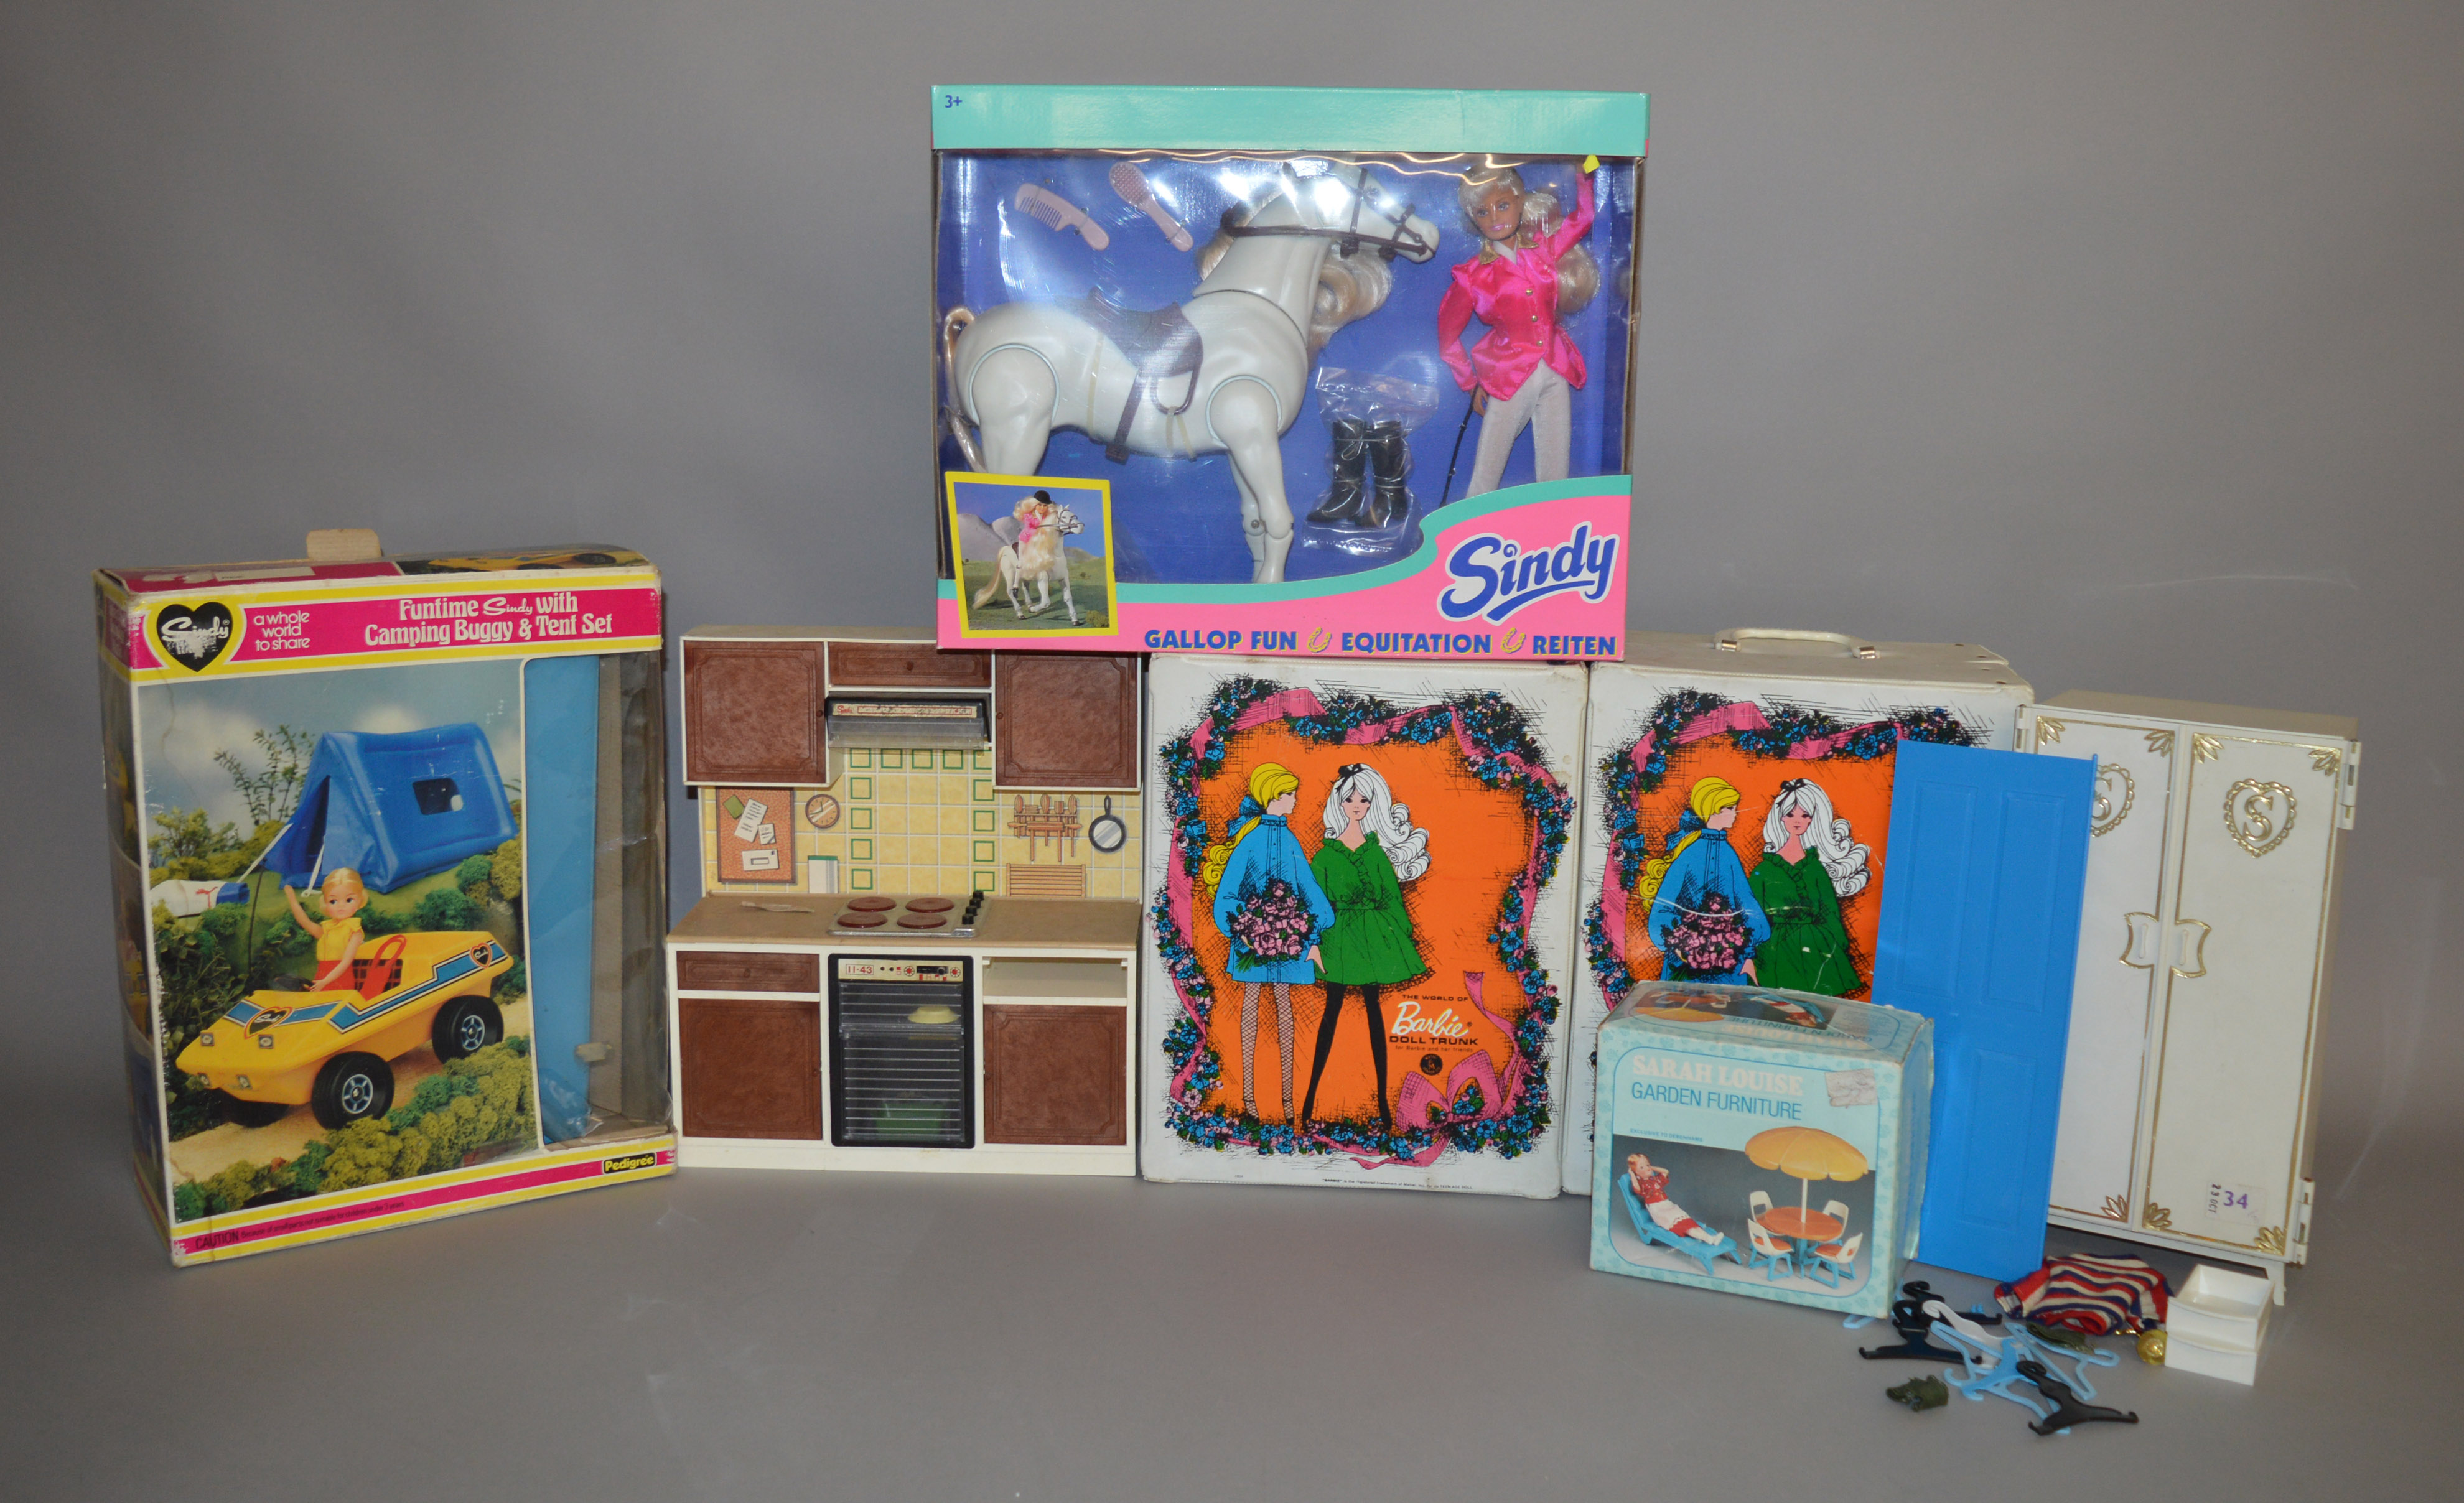 EX-SHOP STOCK: Quantity of Fashion Doll accessories including a boxed Pedigree Sindy Camping Buggy